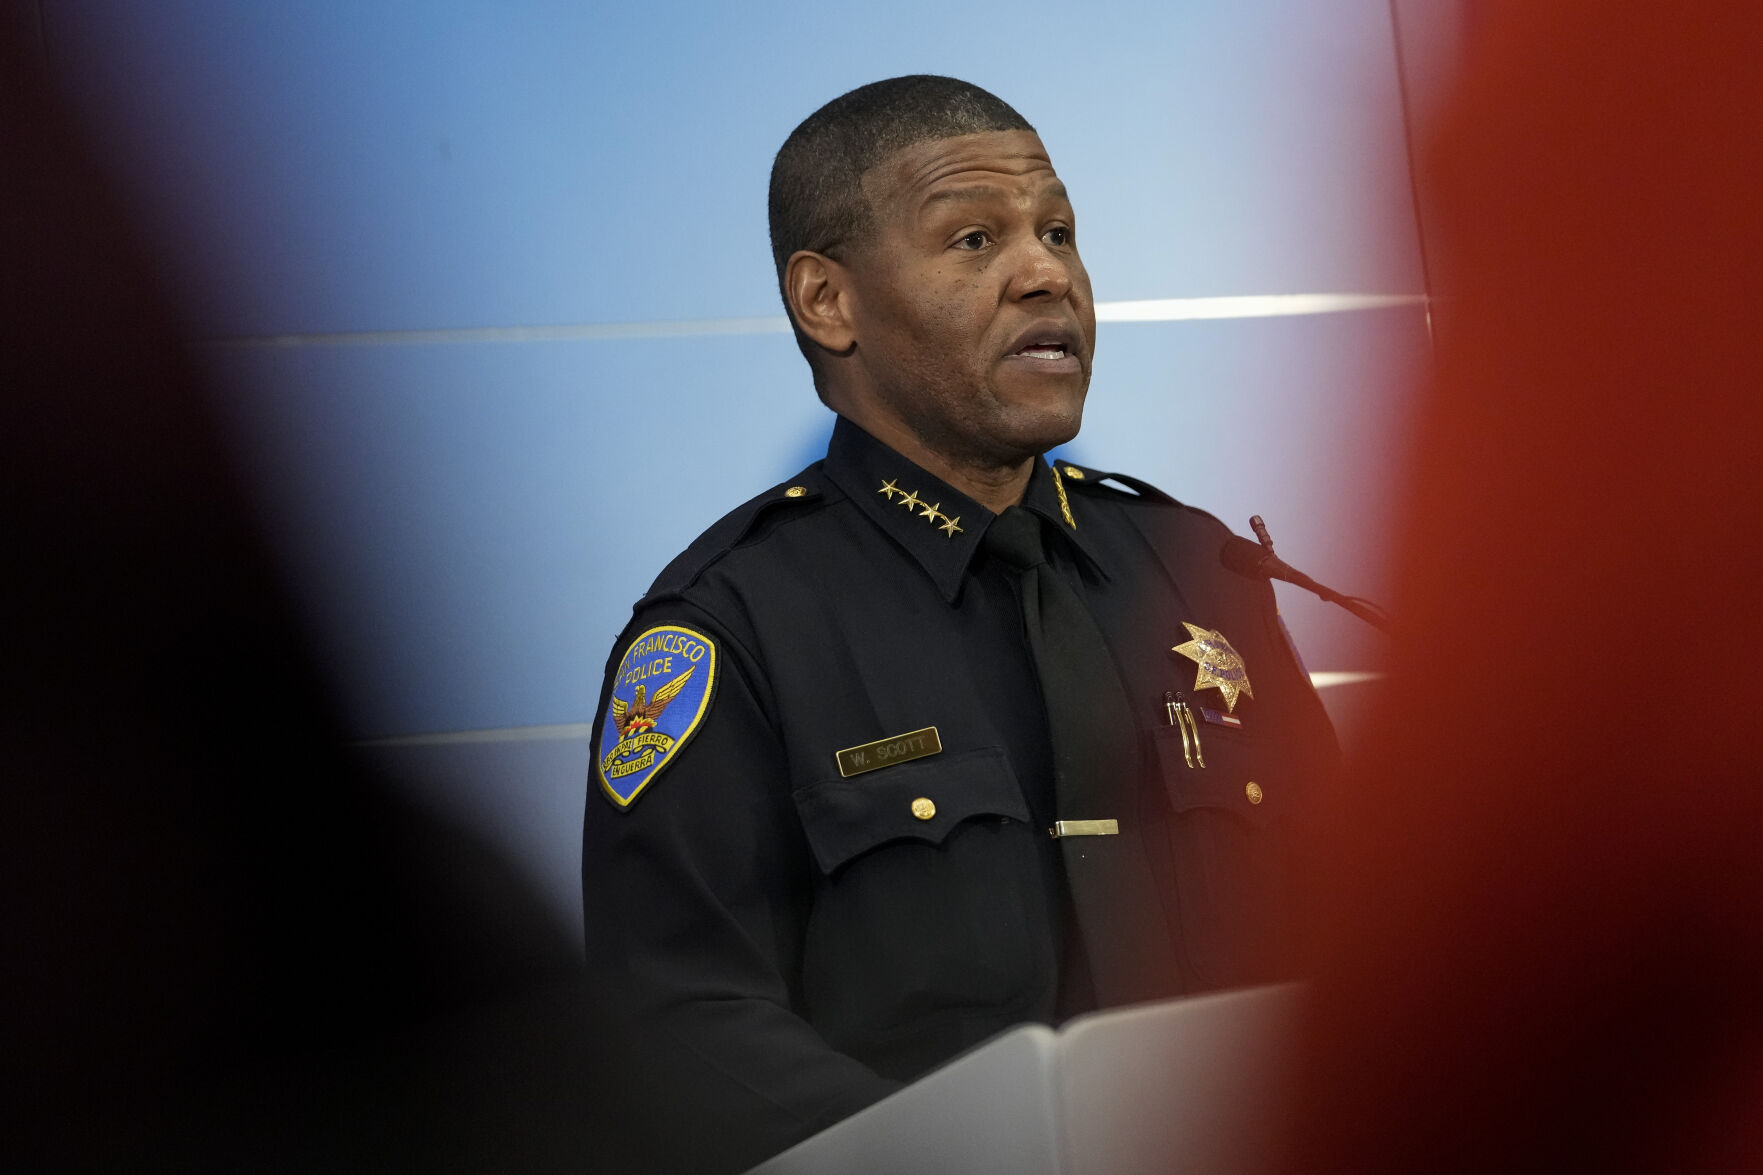 <p>San Francisco Police chief William Scott provides an update on the homicide investigation of Robert Lee during a press conference where officials announced the arrest of a suspect, Thursday, April 13, 2023, in San Francisco. (AP Photo/Godofredo A. Vásquez)</p>   PHOTO CREDIT: Godofredo A. Vásquez - staff, AP